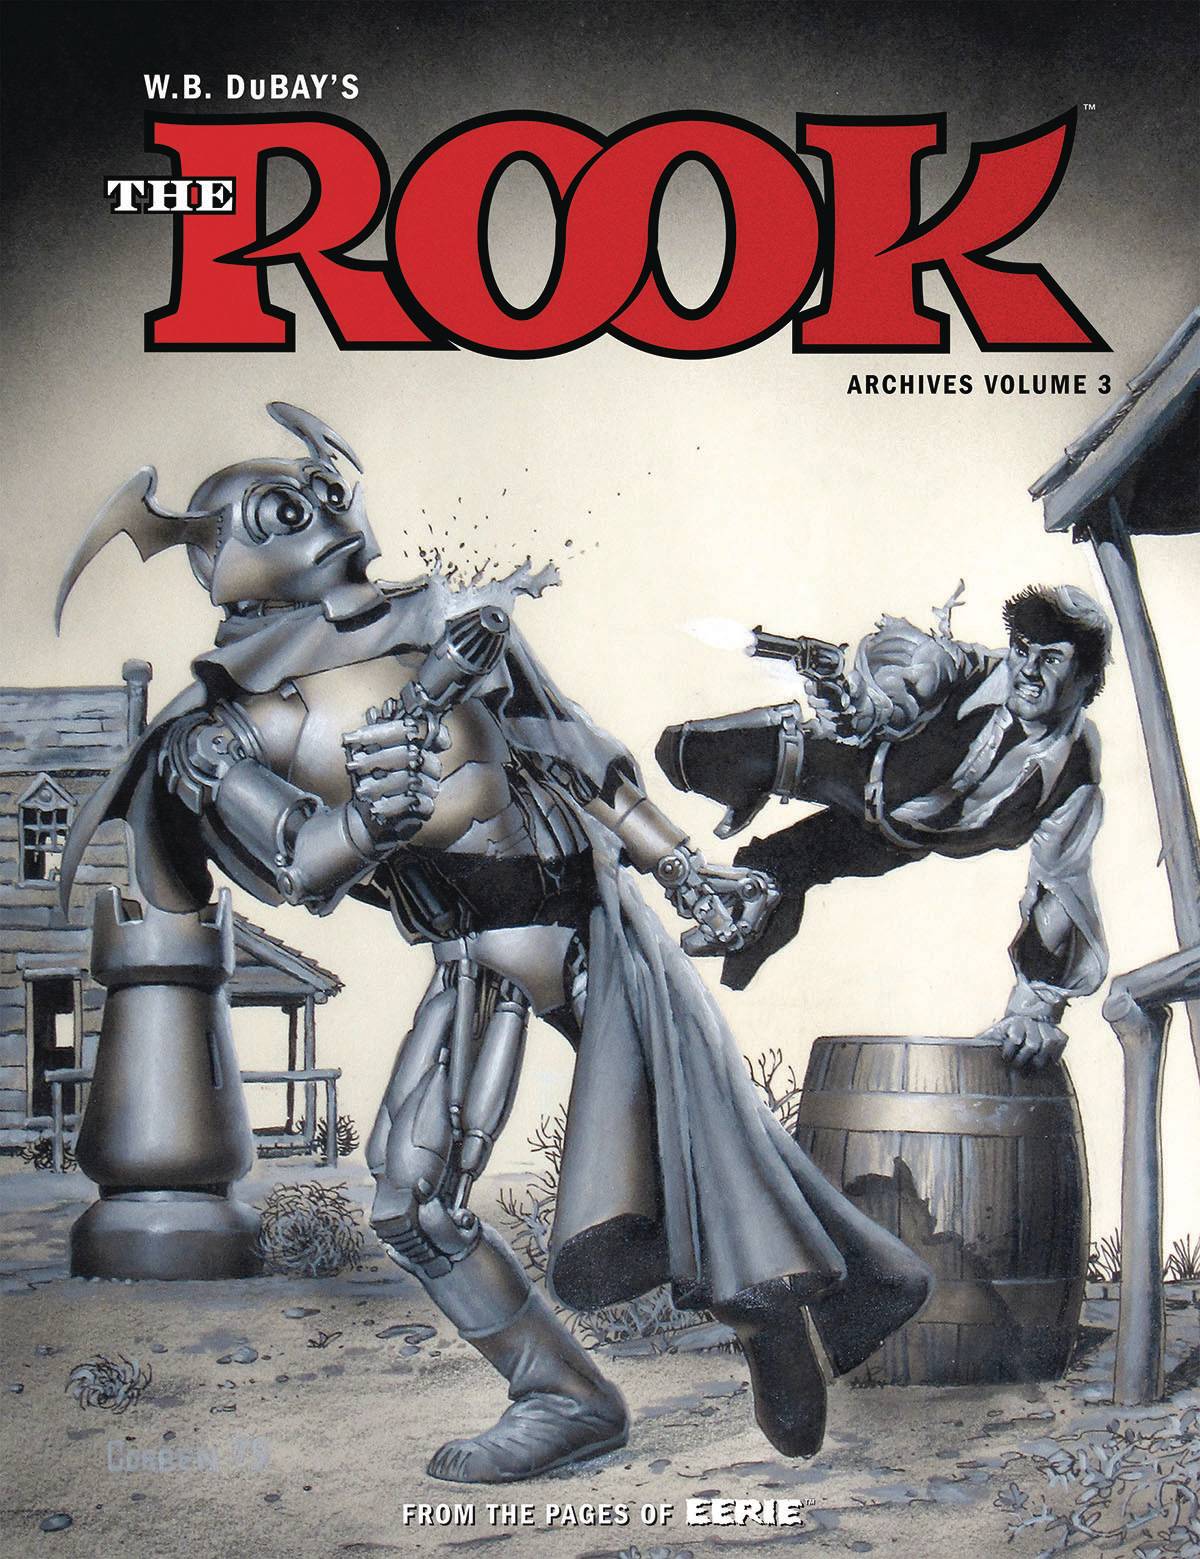 W. B. Dubay's The Rook Archives Hardcover Volume 3